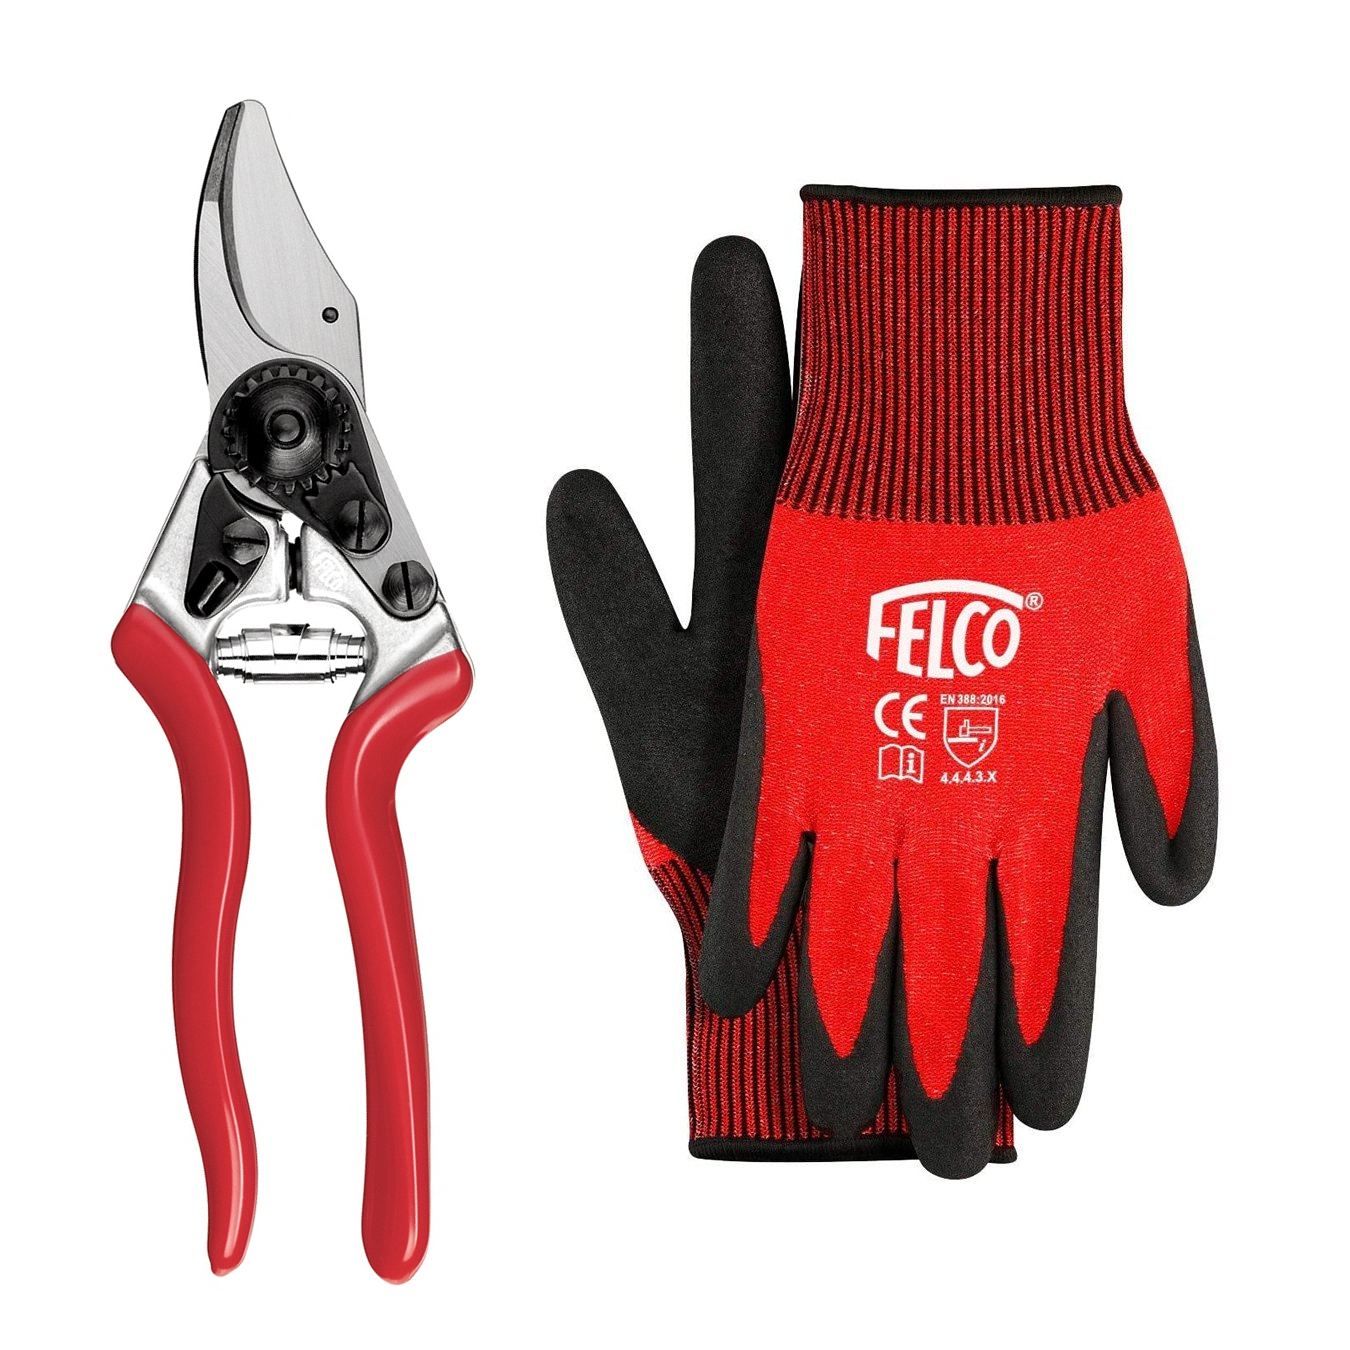 Felco Model 6 Compact Secateurs with Gloves - Pruning shears - Genuine Felco - official Felco stockist